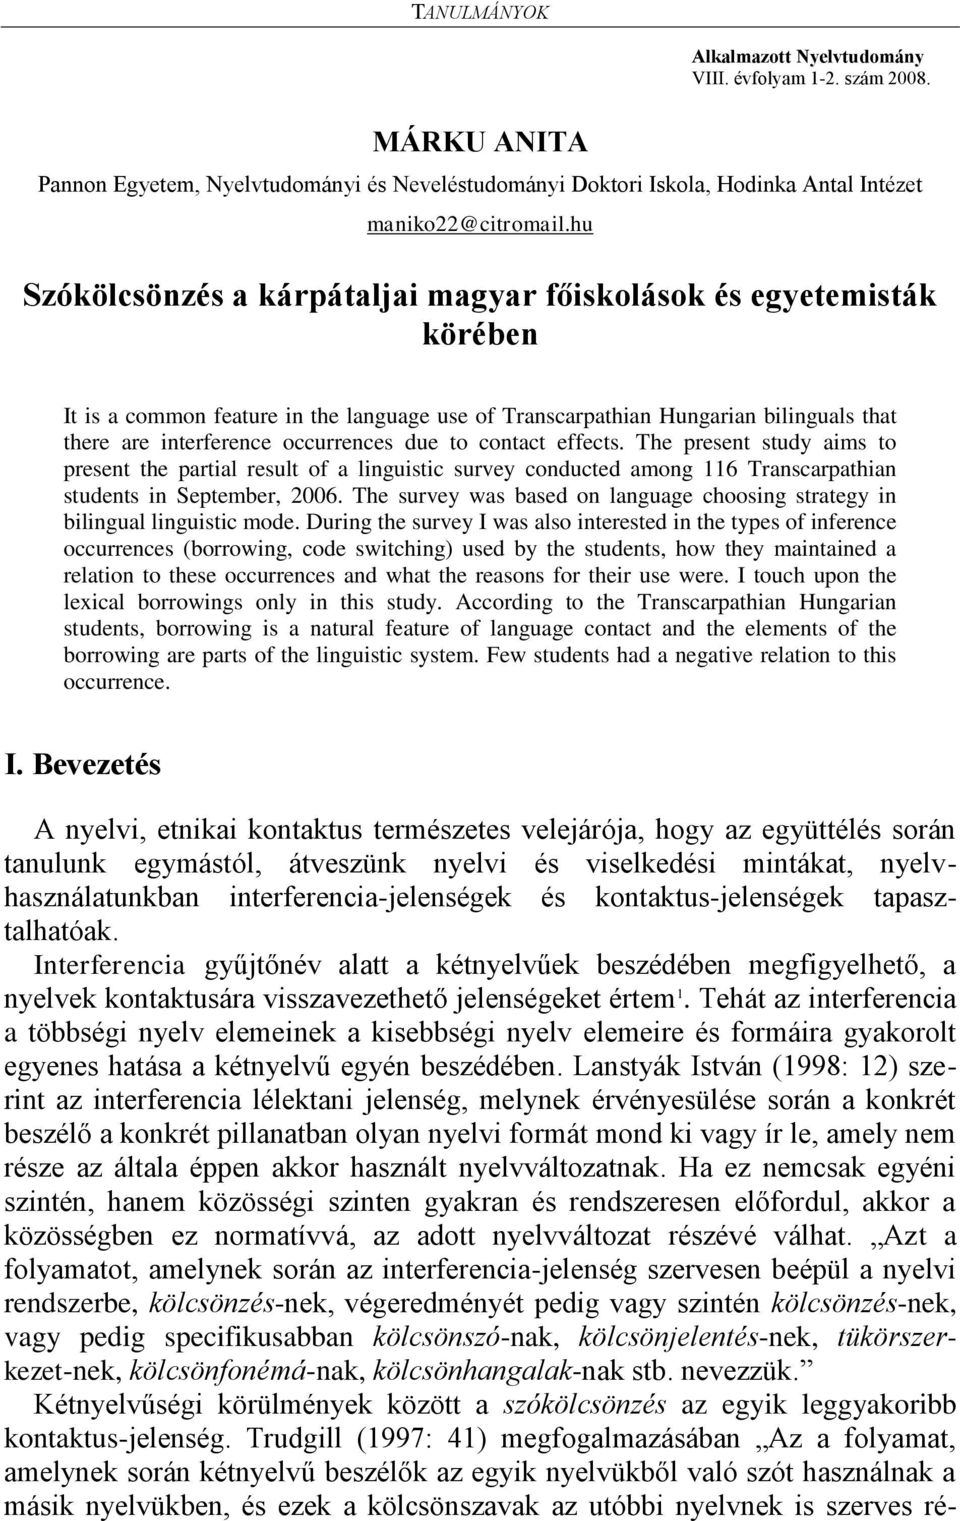 due to contact effects. The present study aims to present the partial result of a linguistic survey conducted among 116 Transcarpathian students in September, 2006.